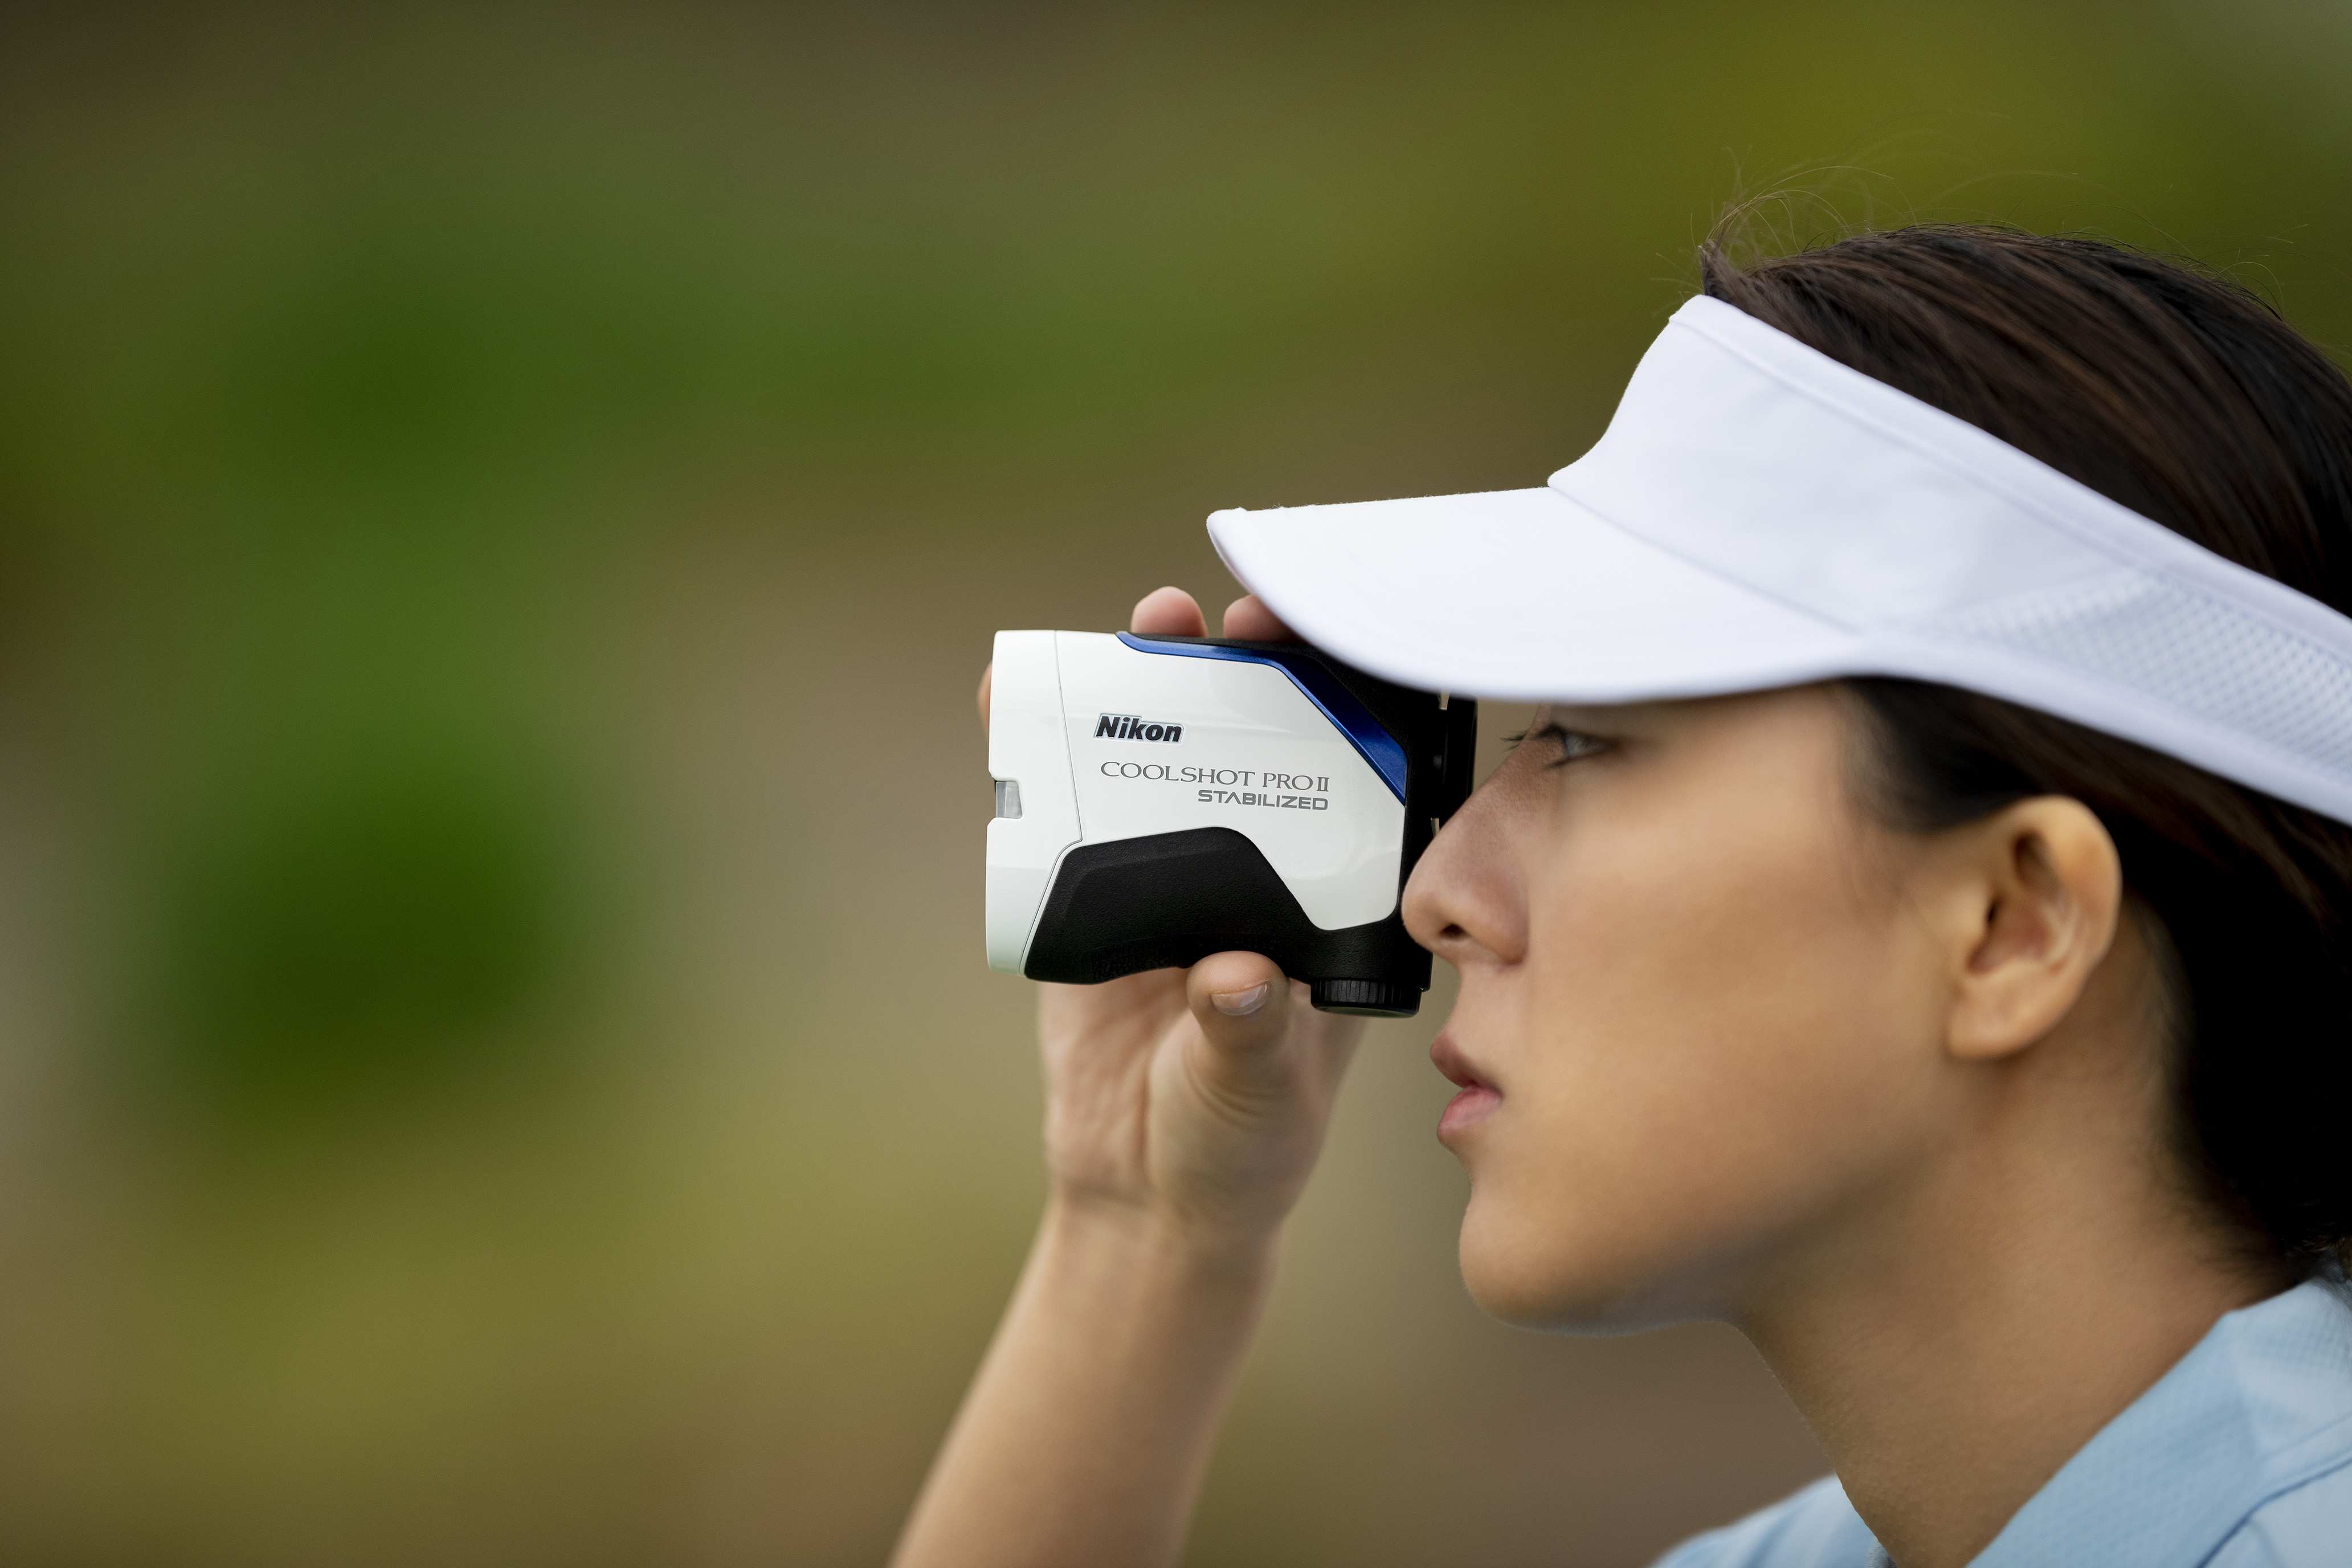 NIKON'S TWO NEW LASER RANGEFINDERS BRING a GOLFER'S GAME to the